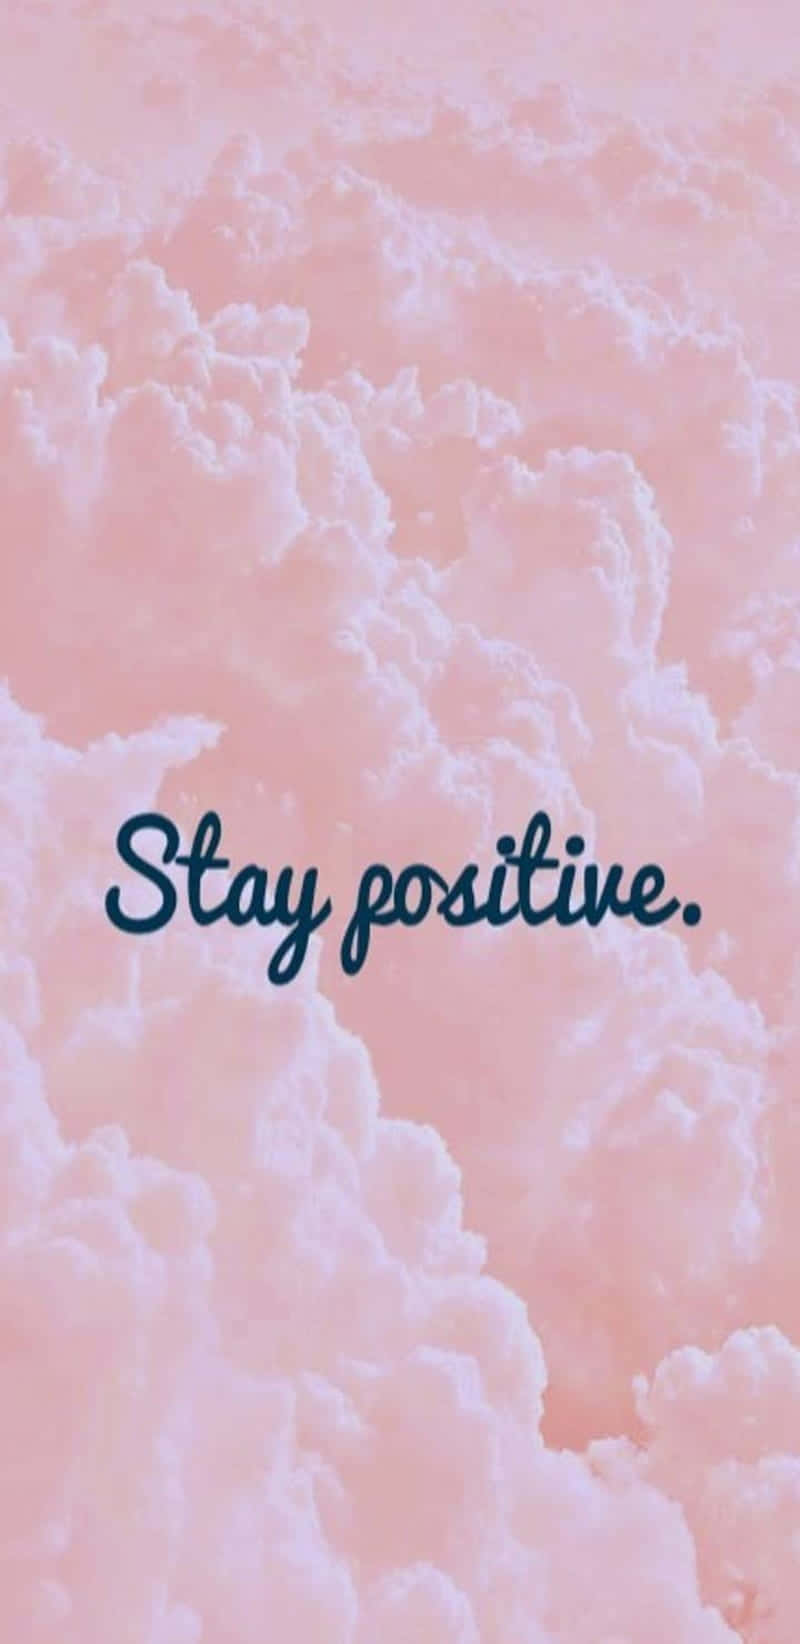 Stay Positive_ Pink Clouds_ Inspirational Quote.jpg Wallpaper